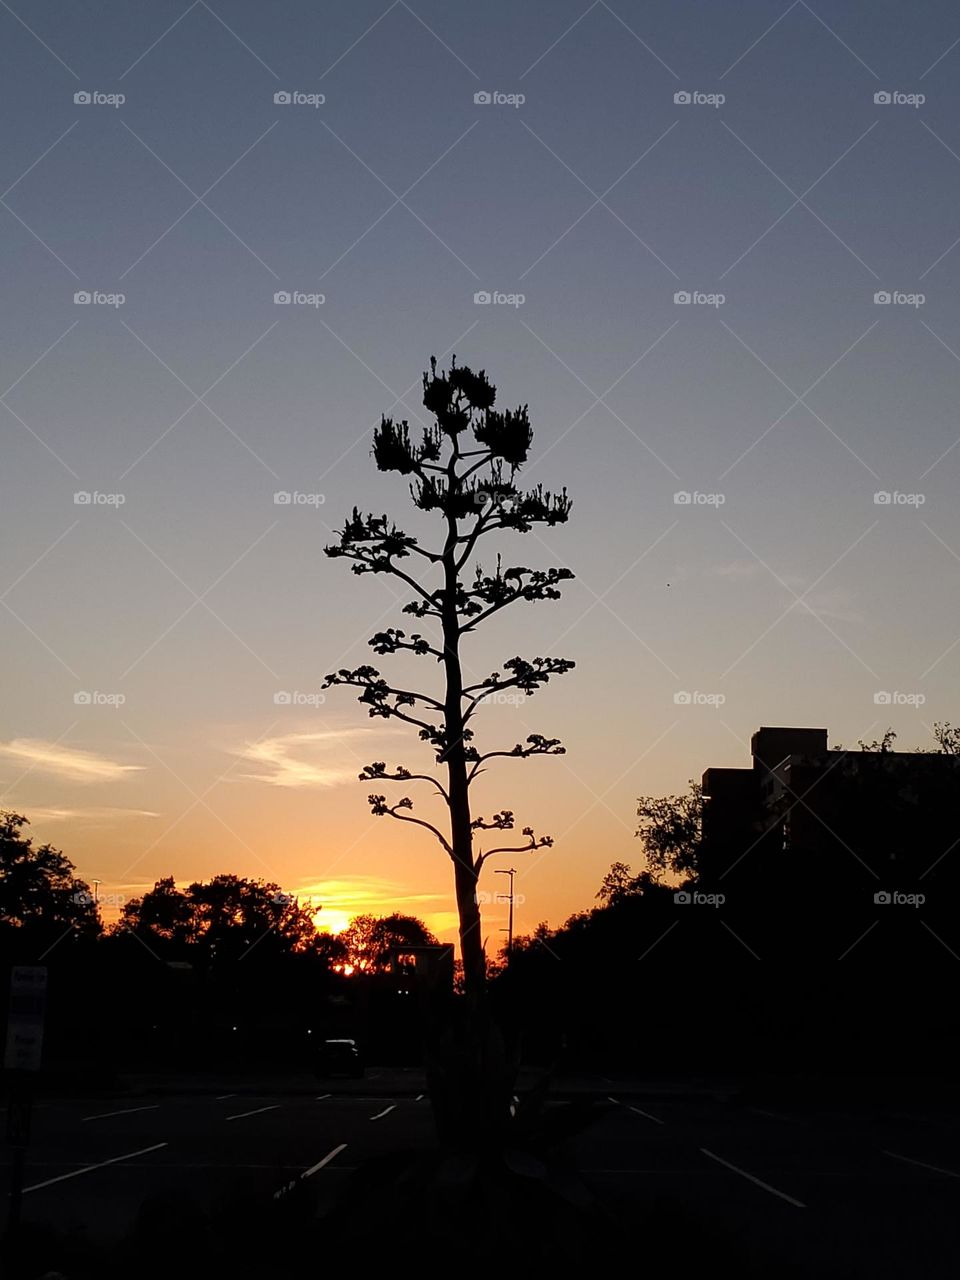 A magical sunset creating a beautiful silhouette of the century plant flower that flowers after 25 to 30 years of growth.